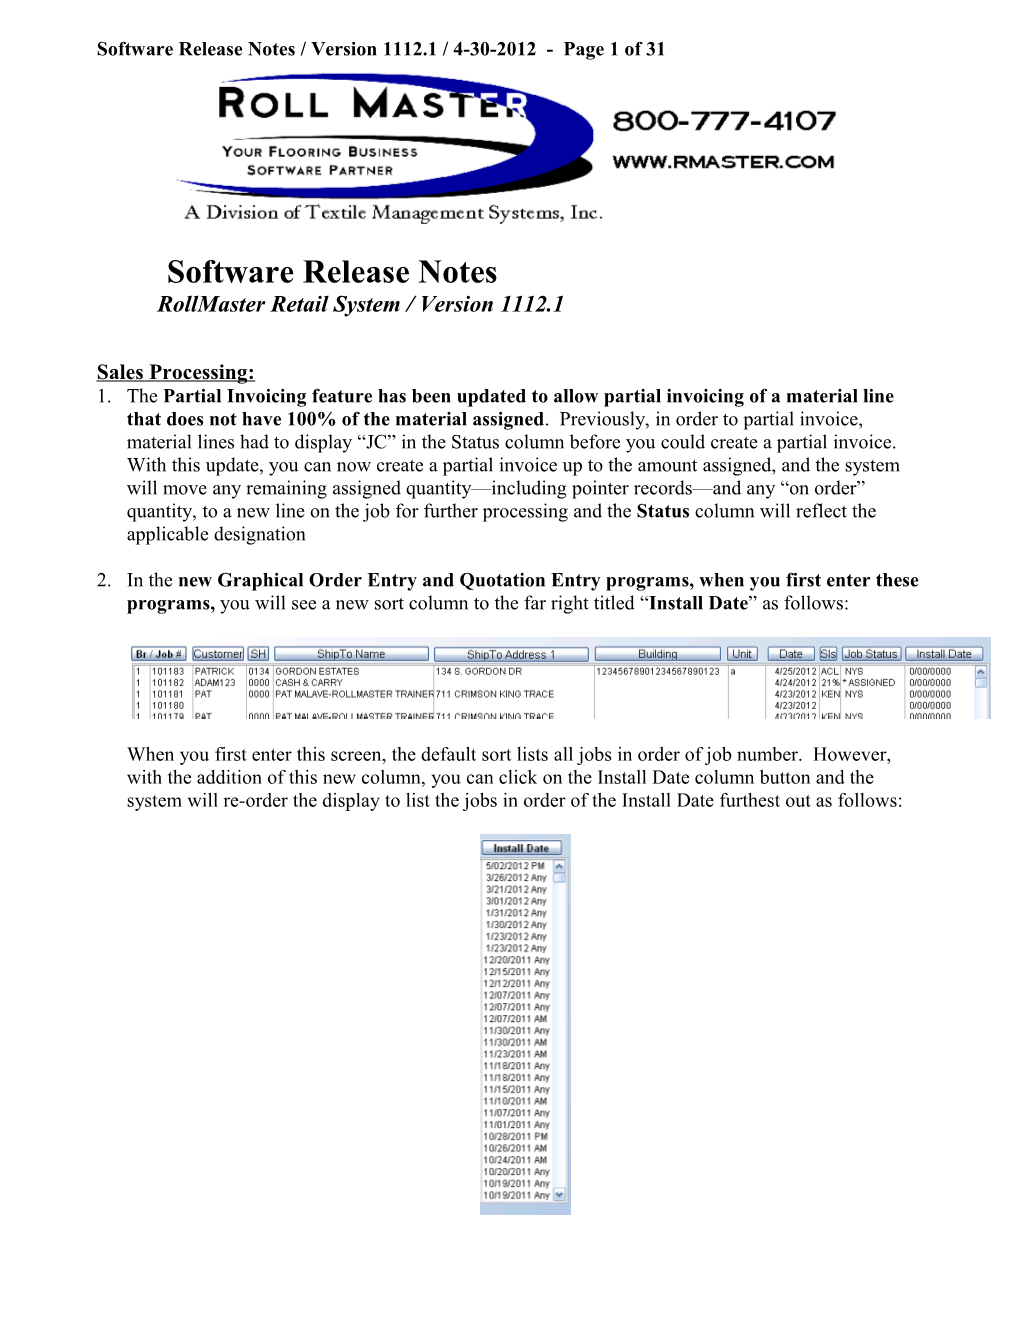 Software Release Notes / Version 1112.1 / 4-30-2012 - Page 1 of 31